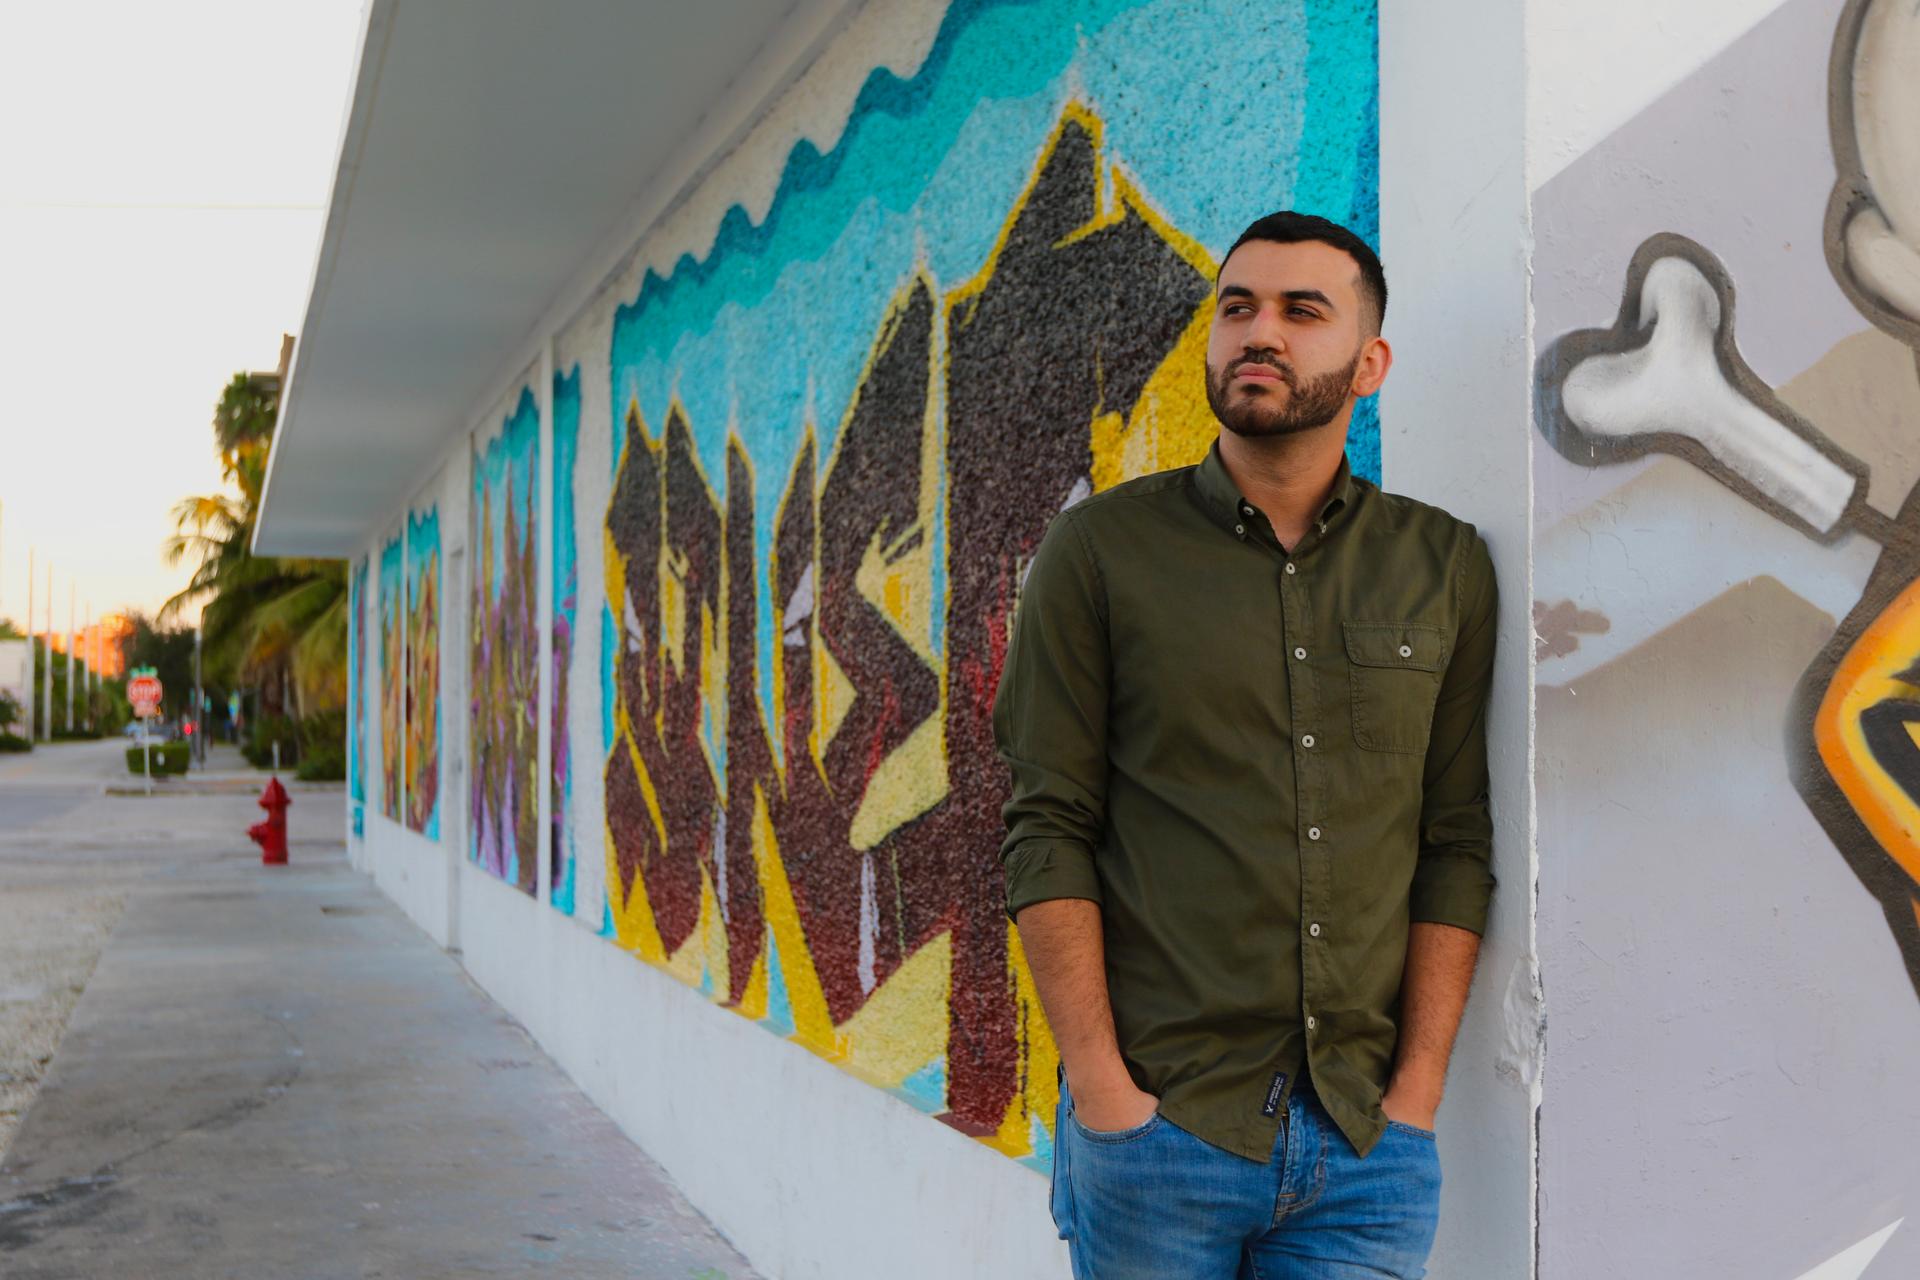 A man leans on a colorfully painted wall and looks over his right shoulder.